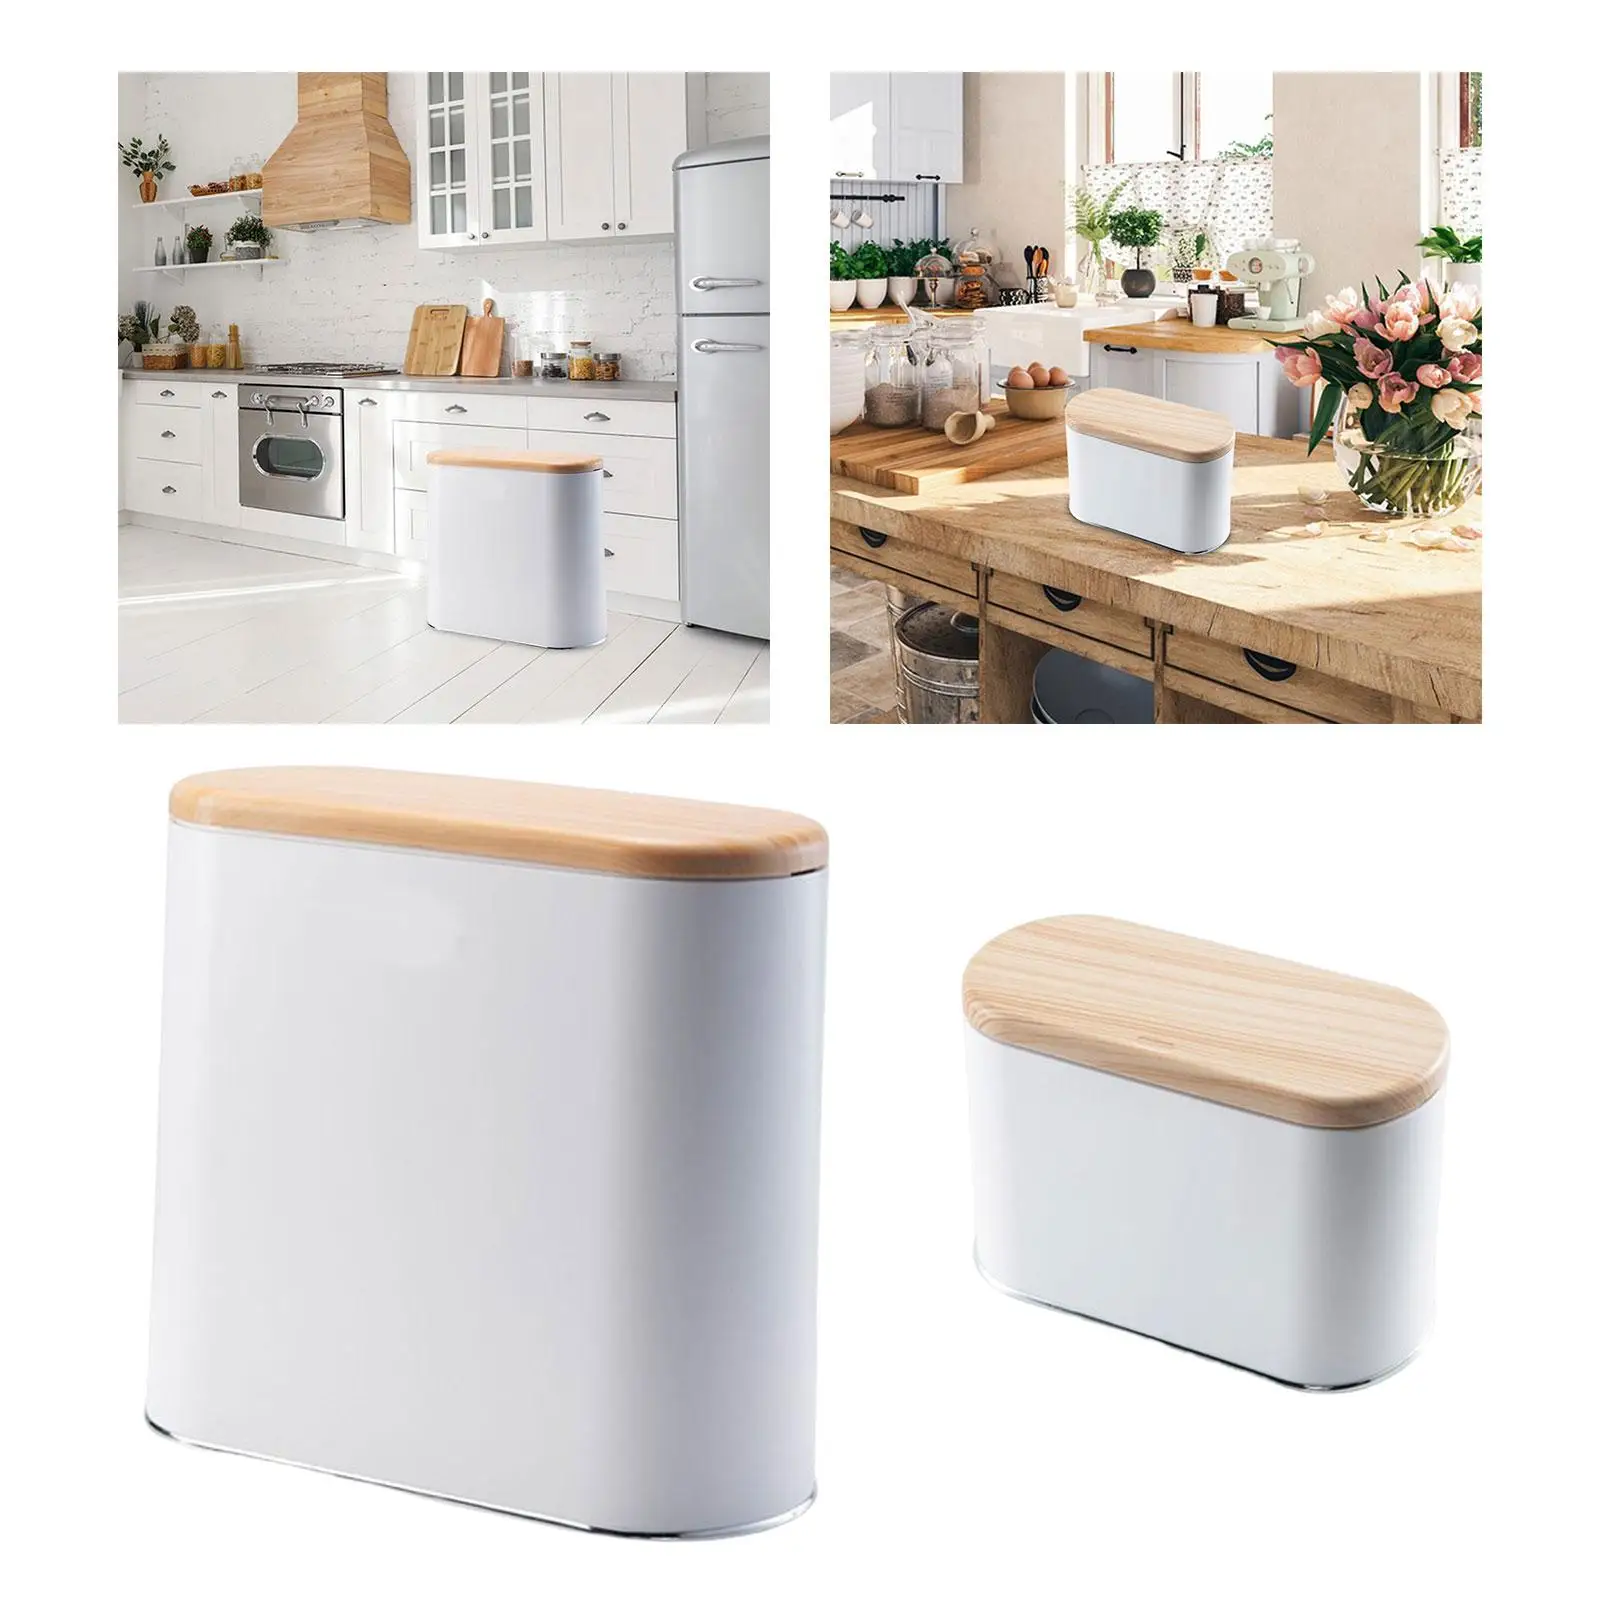 2L/10L Nordic Trash Can Pressing Type Narrow with Wood Lid Paper Basket Garbage Can Dustbin for Toilet Kitchen Bathroom Office